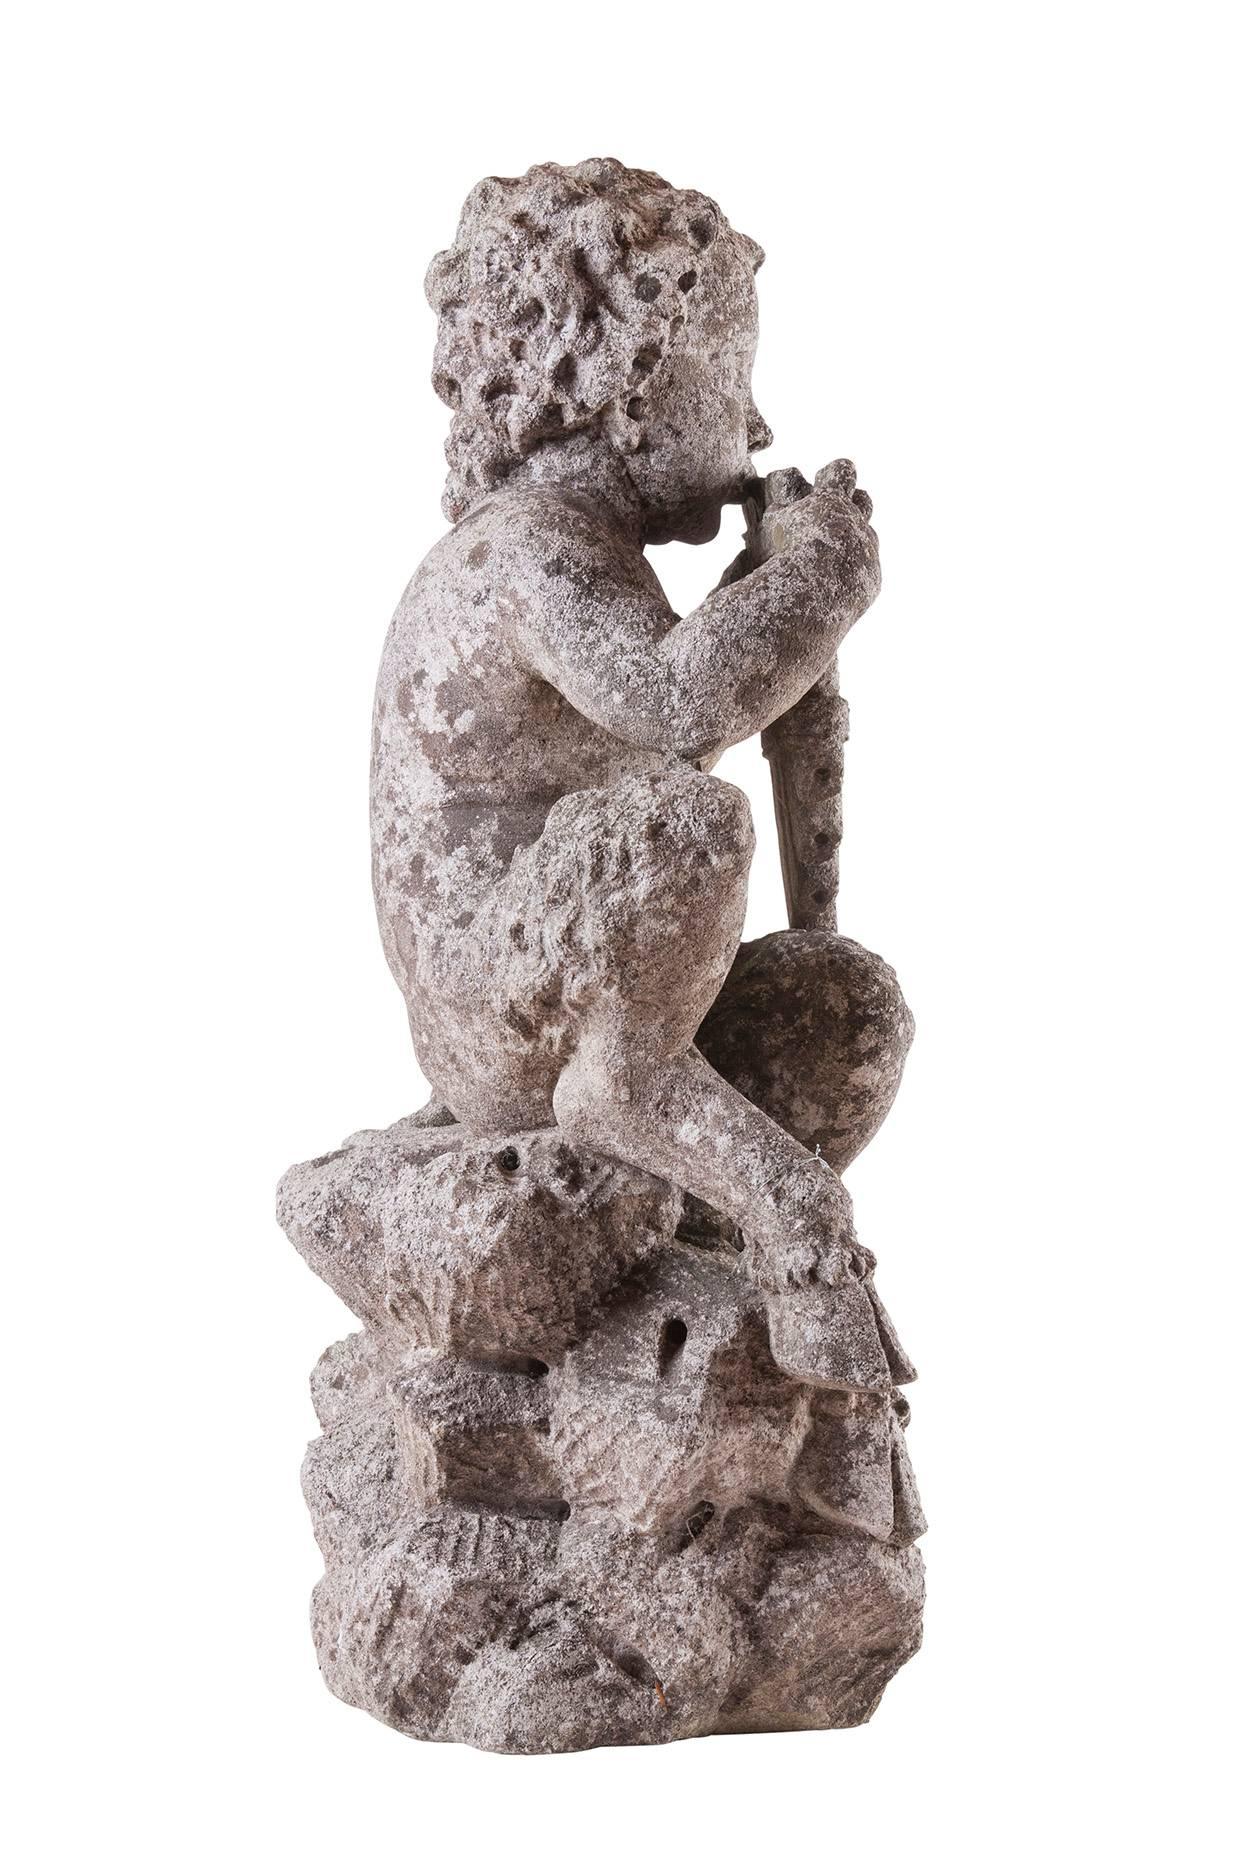 Classical sculpture of a Faun. Around 30 years old. From Italy.
A nice handwork.